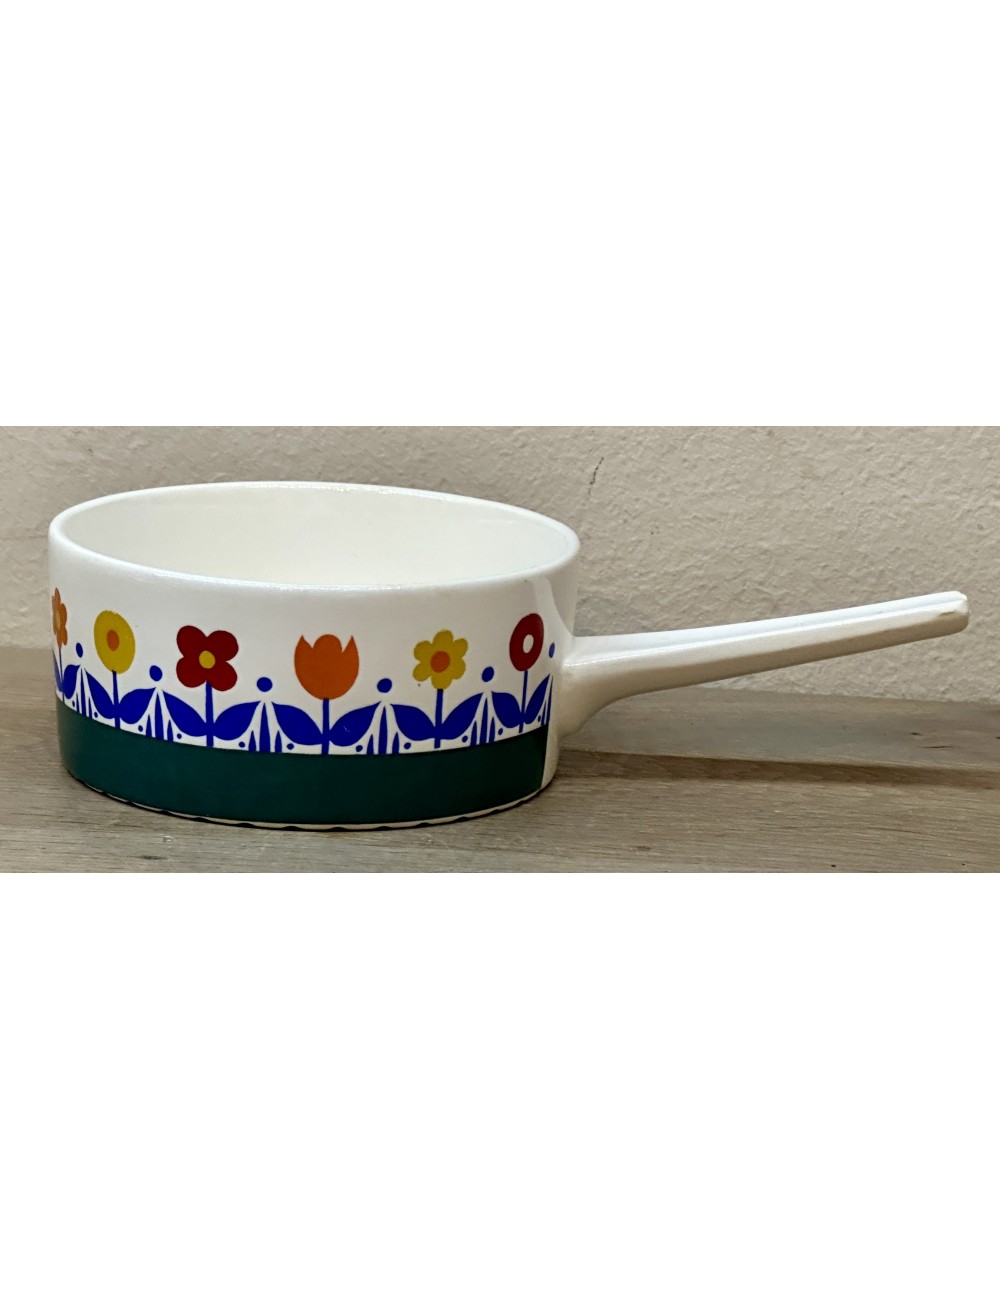 Oven dish / Soufflé dish / Ramequin - with handle/stem - Villeroy & Boch